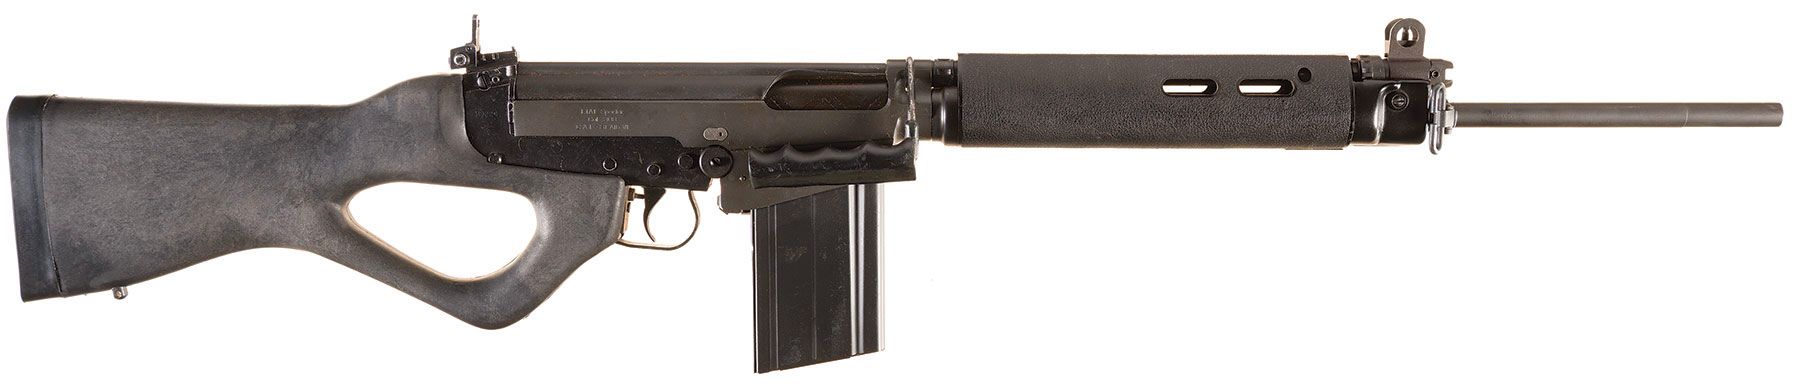 century arms l1a1 sporter rifle review